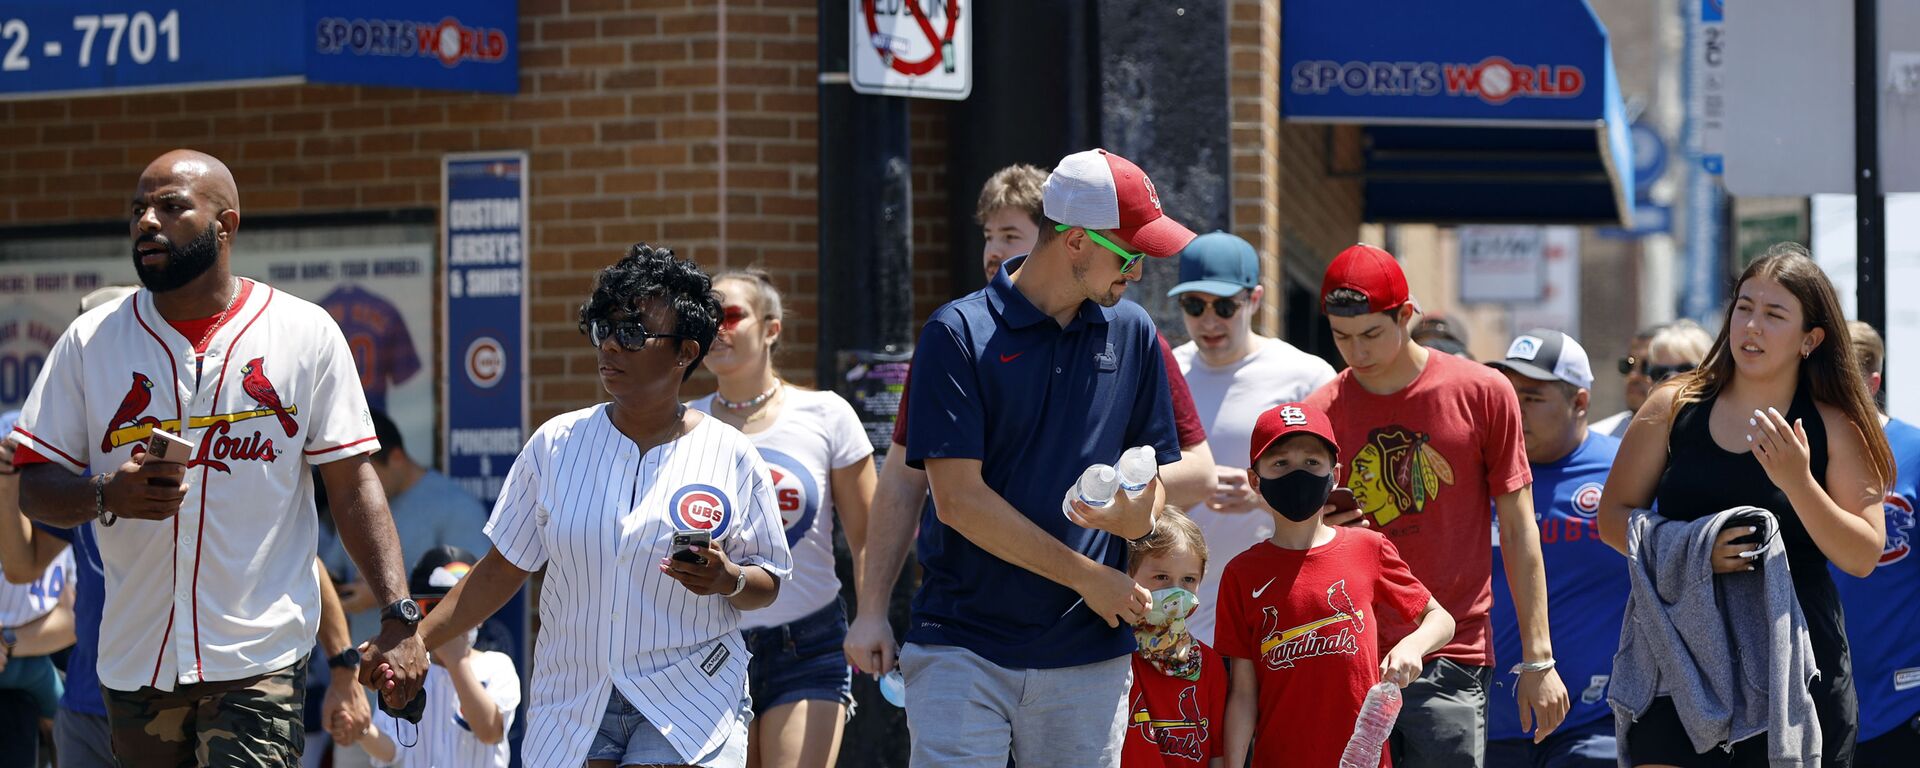 FILE - In this June 11, 2021, file photo, people cross a street as they make their way toward Chicago's Wrigley Field for a baseball game. COVID-19 deaths in the U.S. have dipped below 300 a day for the first time since the early days of the disaster in March 2020, while the number of Americans fully vaccinated has reached about 150 million - Sputnik International, 1920, 24.09.2021